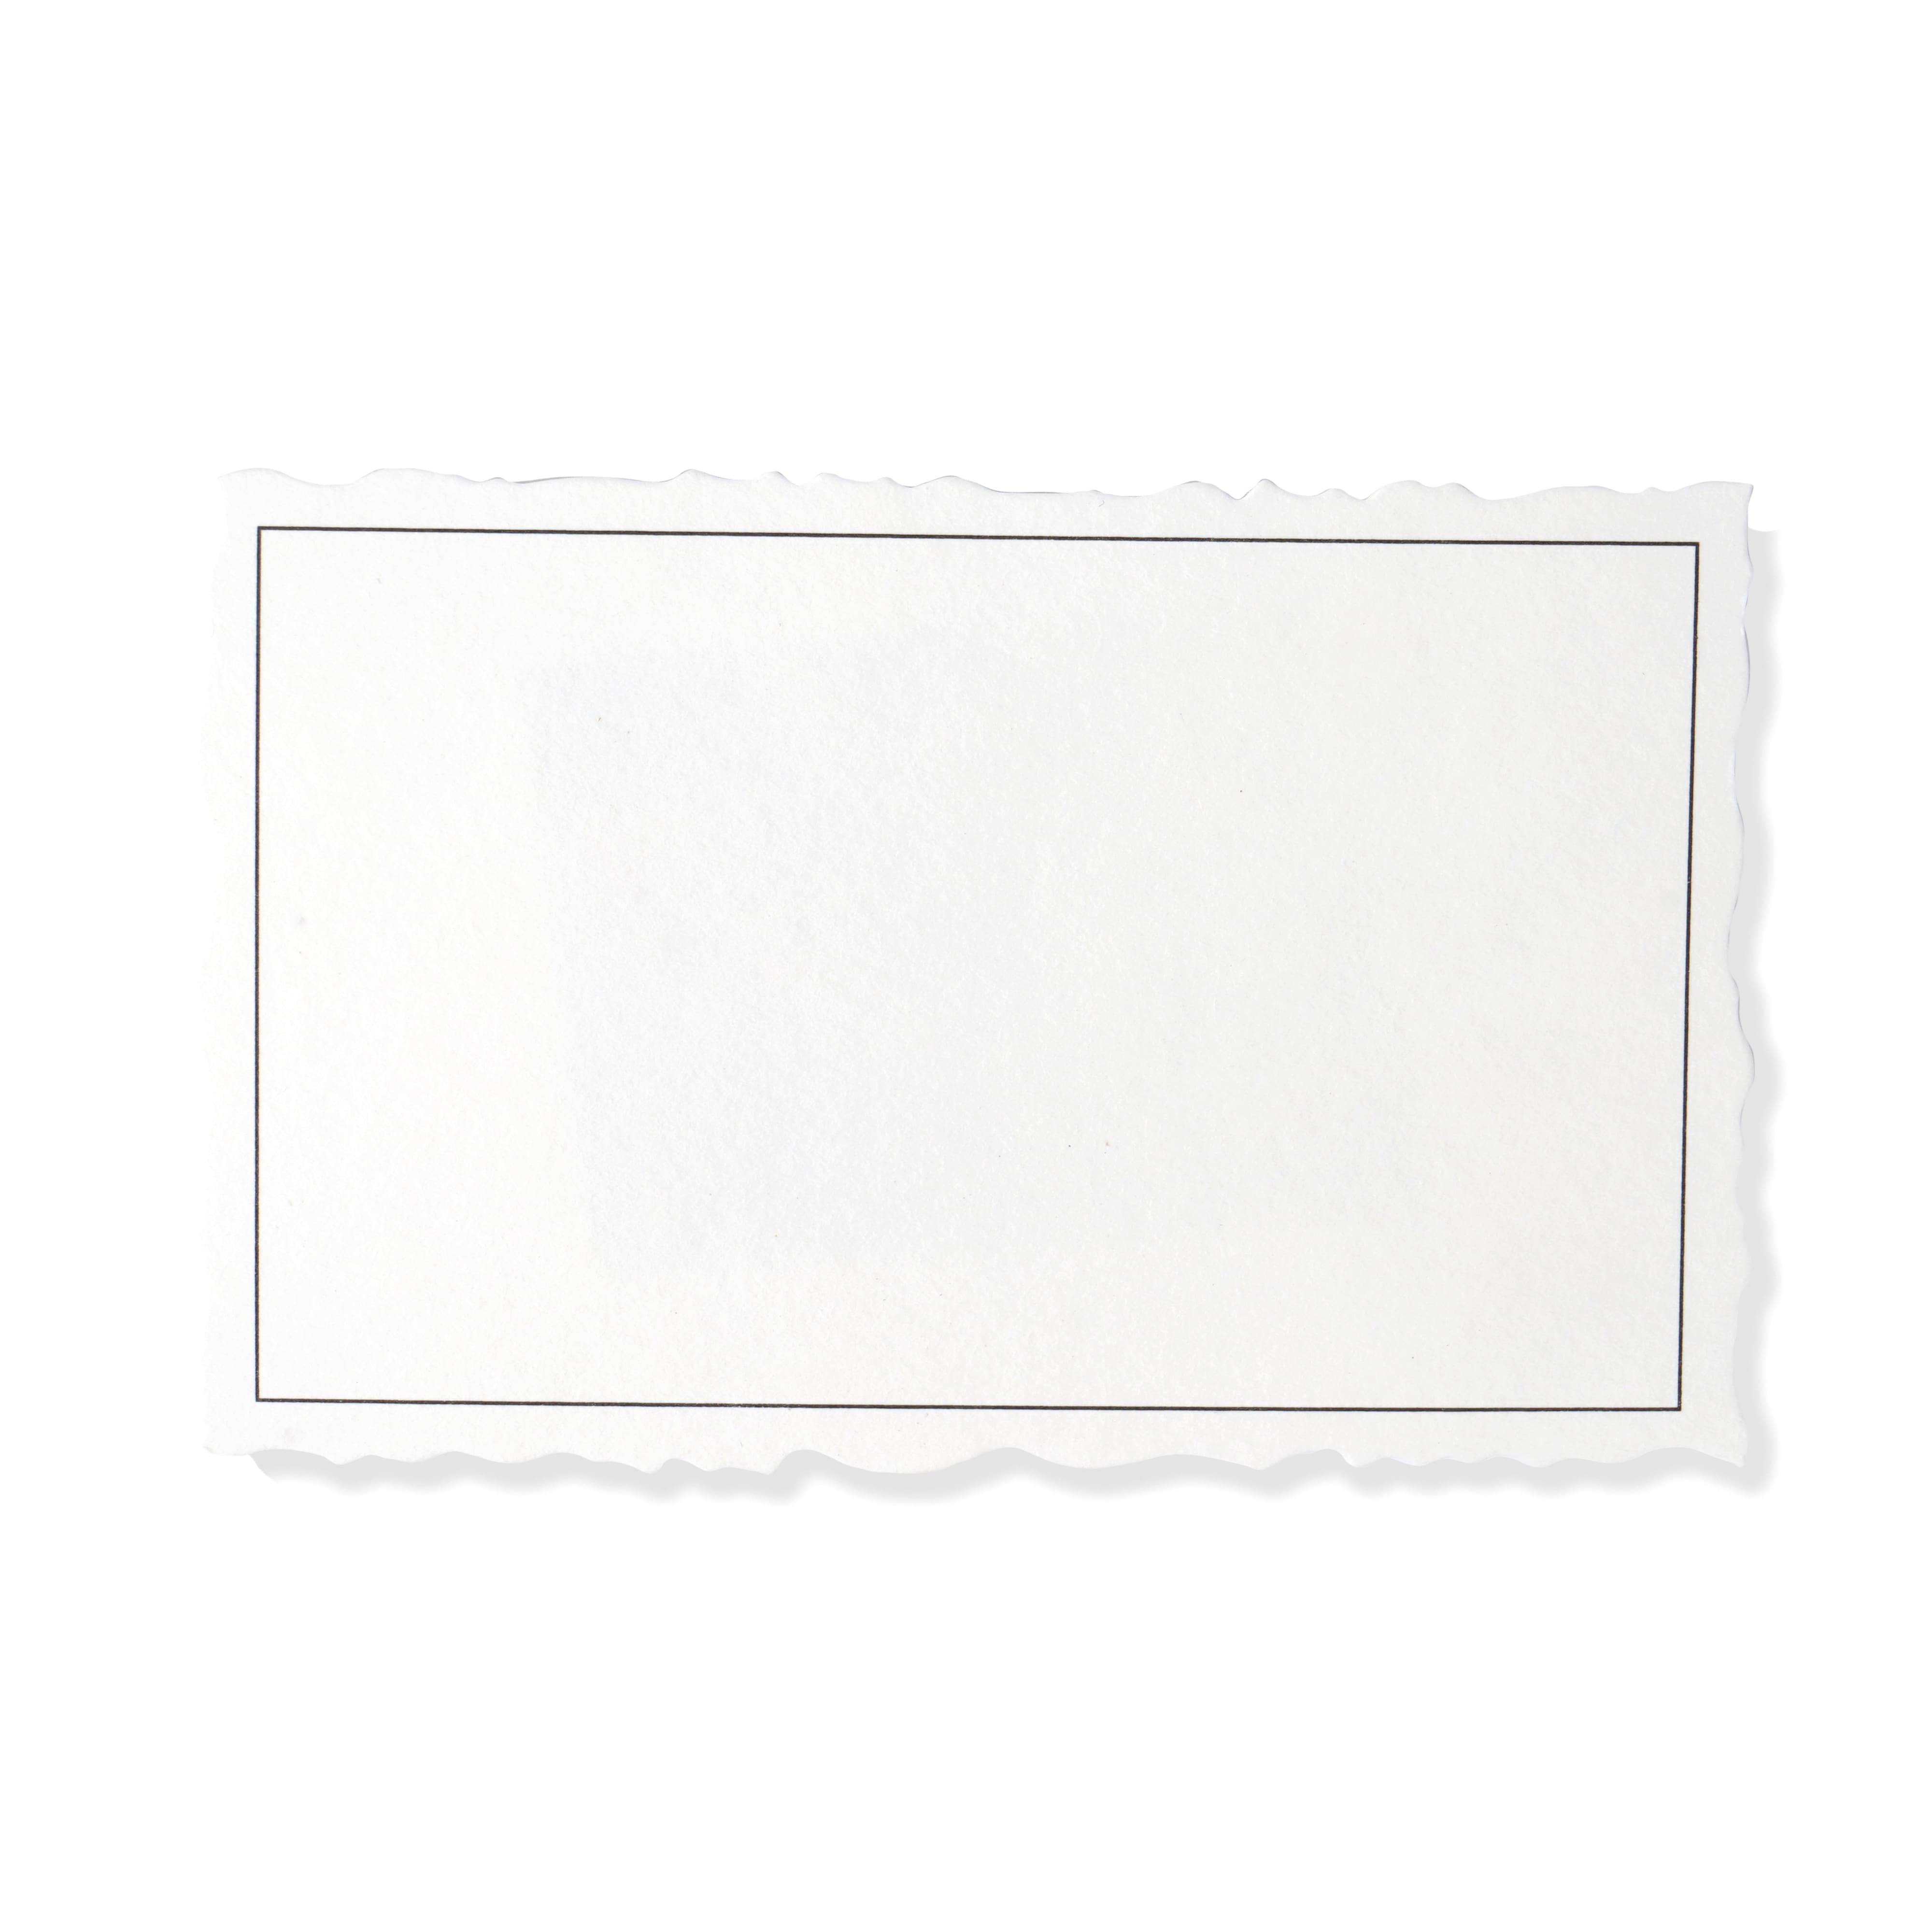 6 Packs: 50 ct. (300 total) Style Me Pretty White with Black Border Place Cards